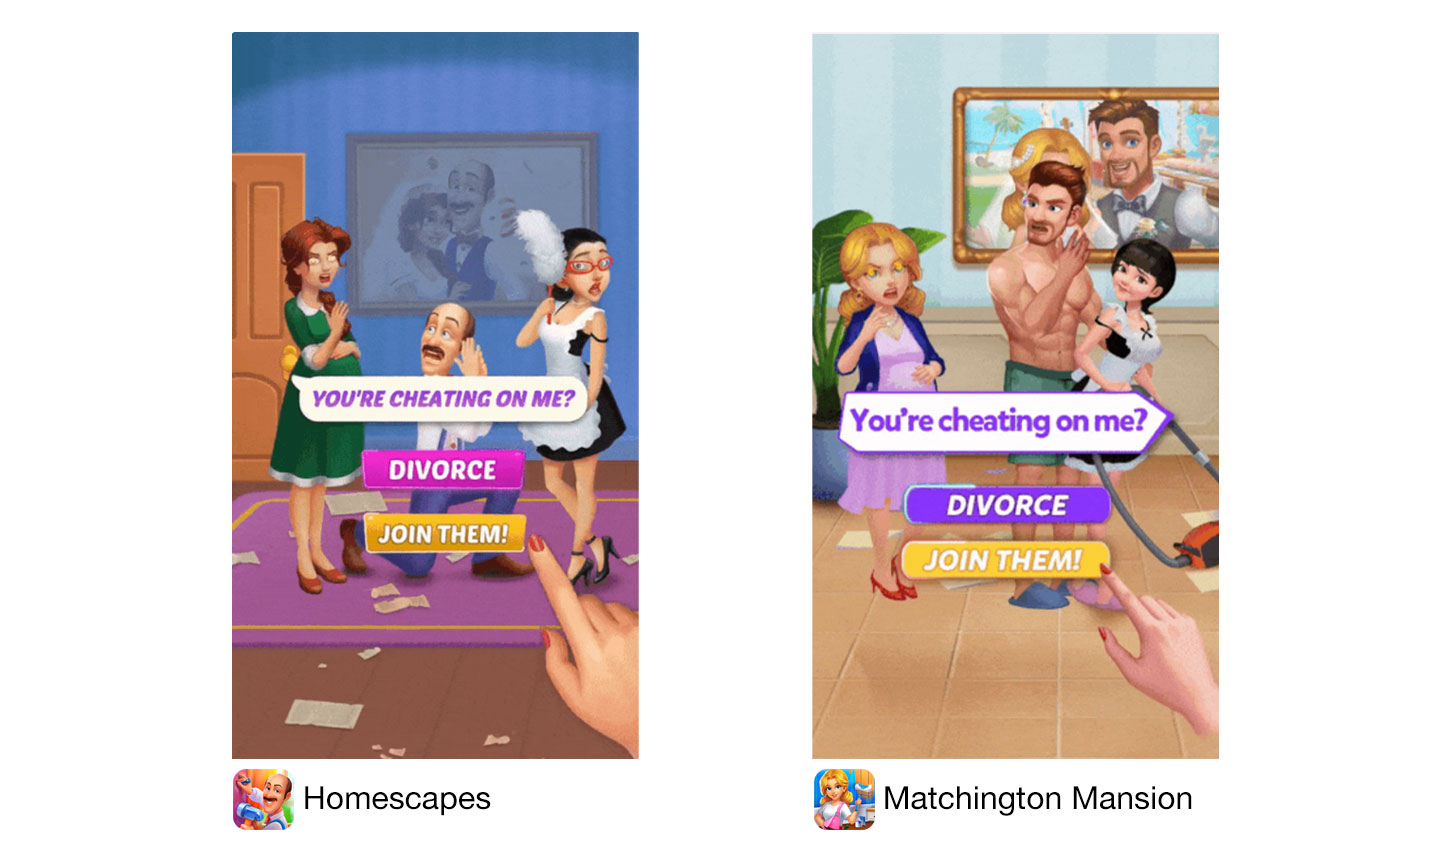 Homescapes' mobile ads are similar to competitor Matchington Mansion's